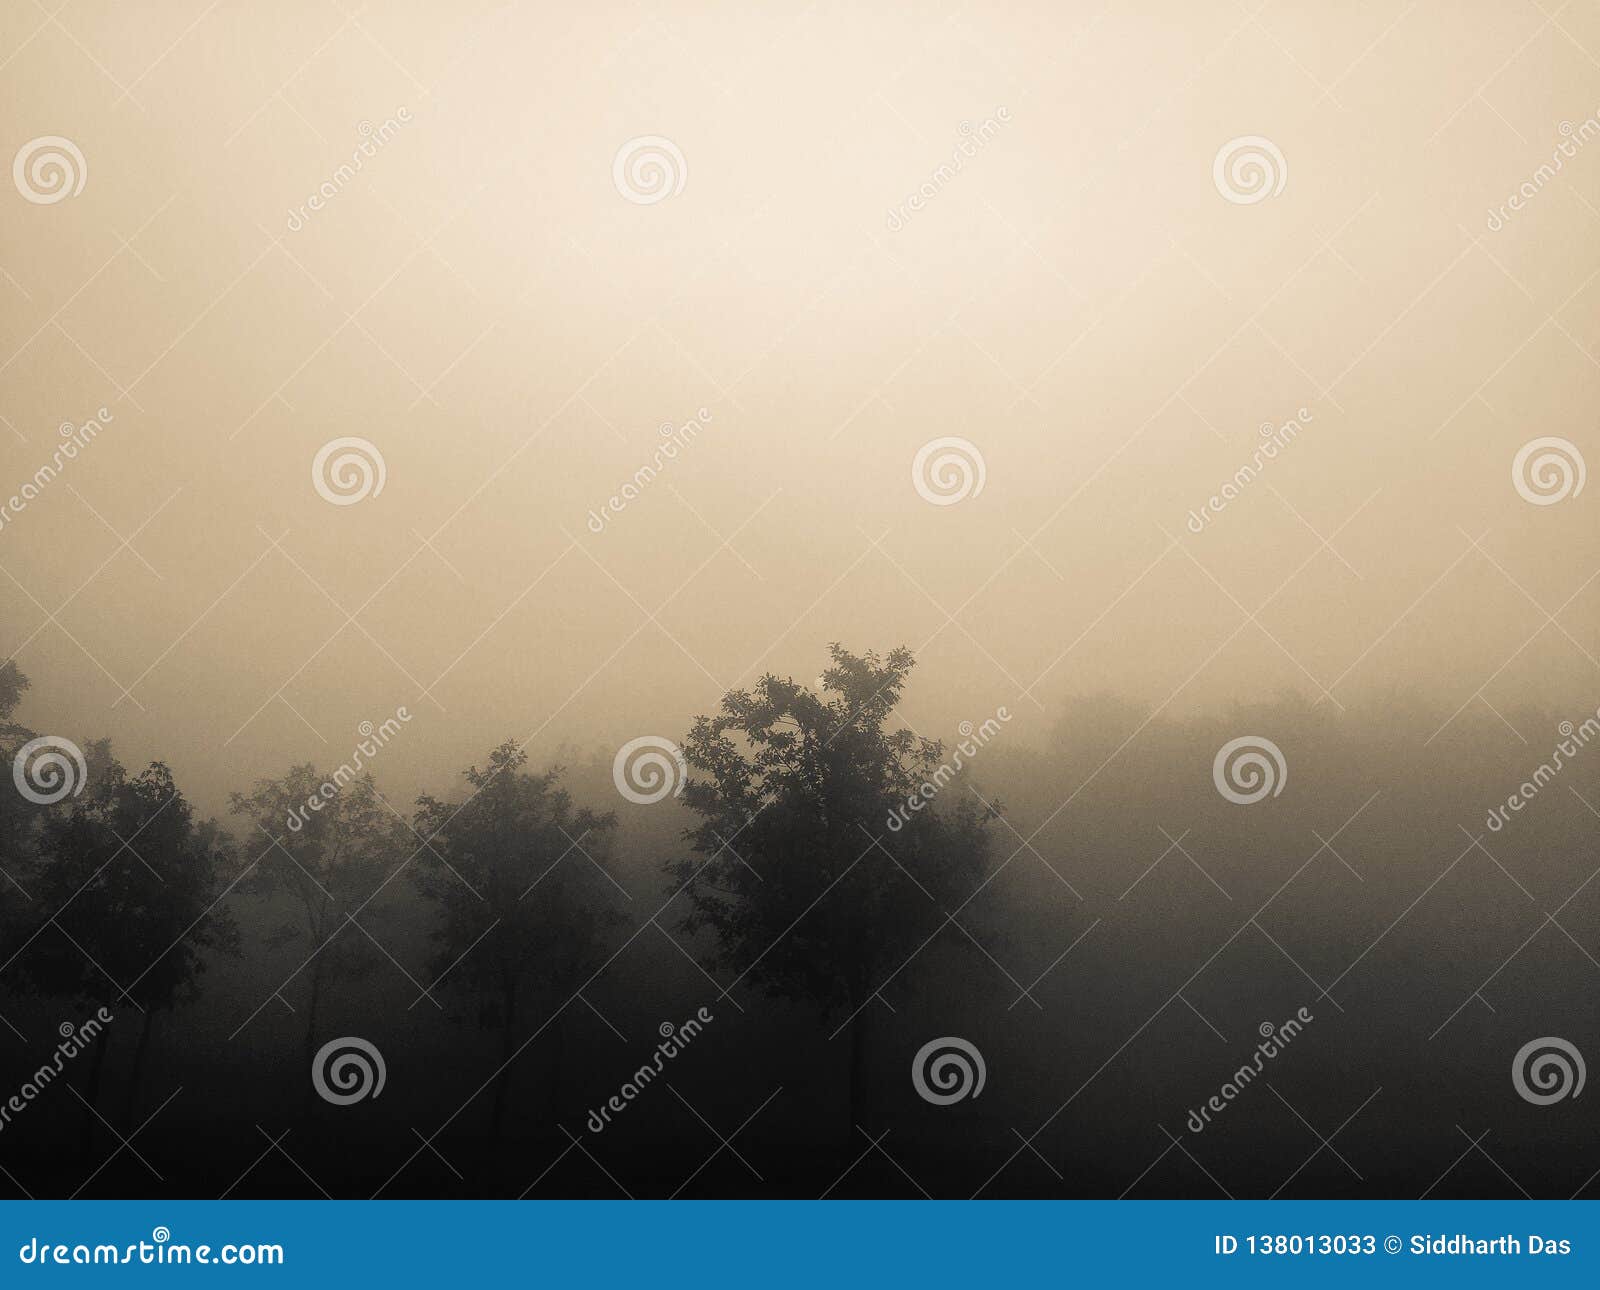 Trees and Branches in Foggy Weather Stock Image - Image of foggy